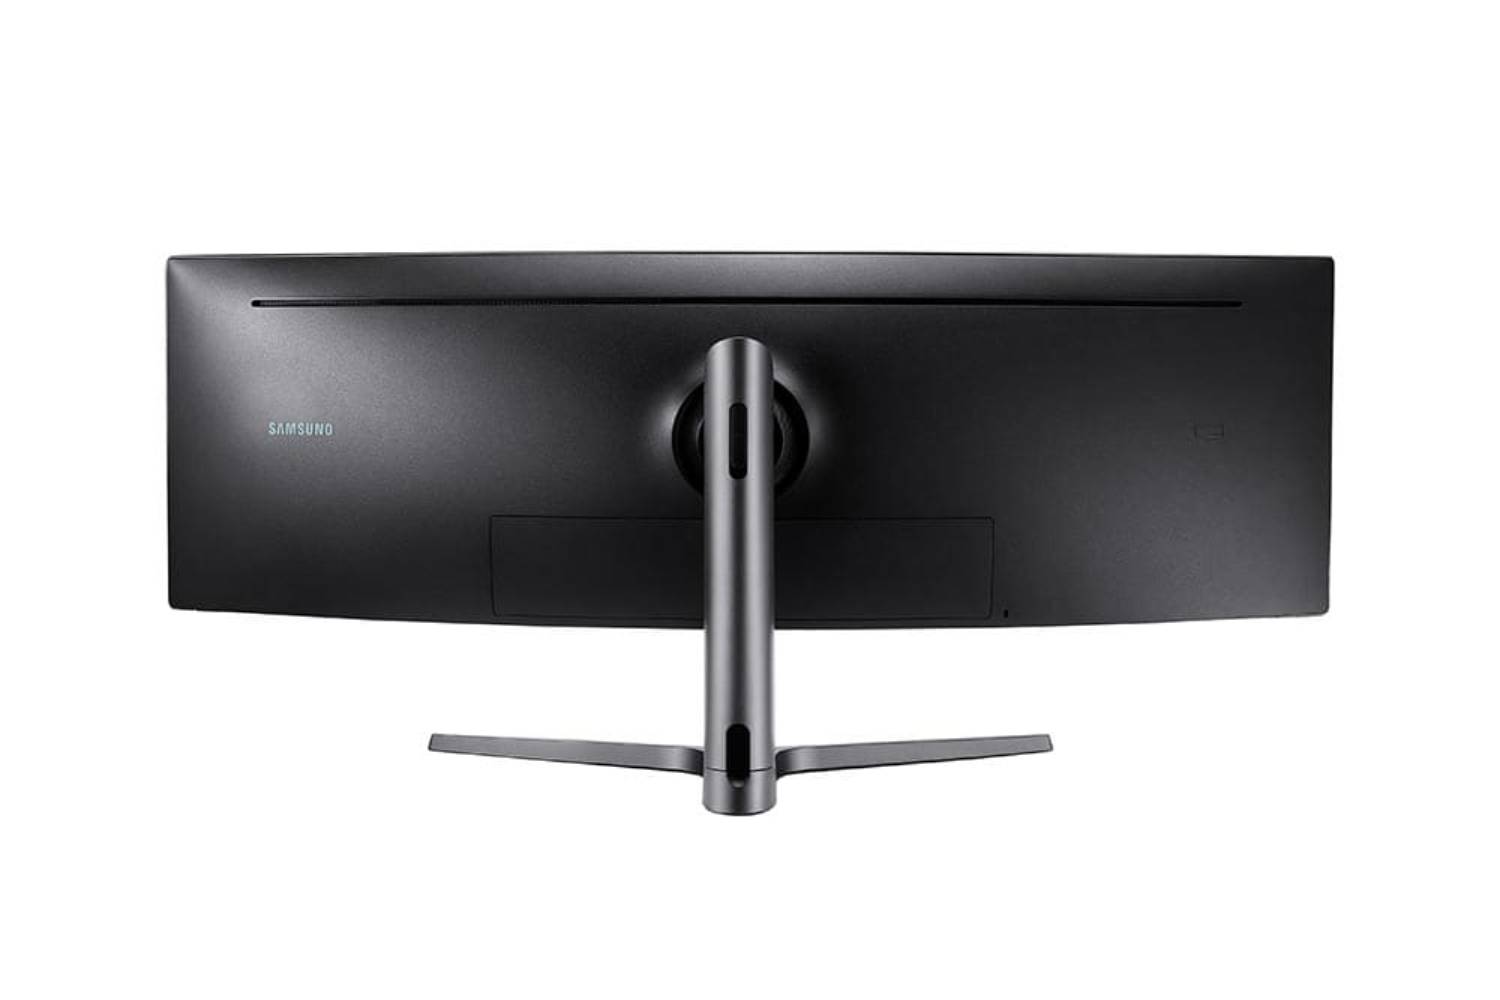 Samsung 48.9 inch (124.2 cm) Curved Gaming Monitor USB-C LC49J890DKWXXL